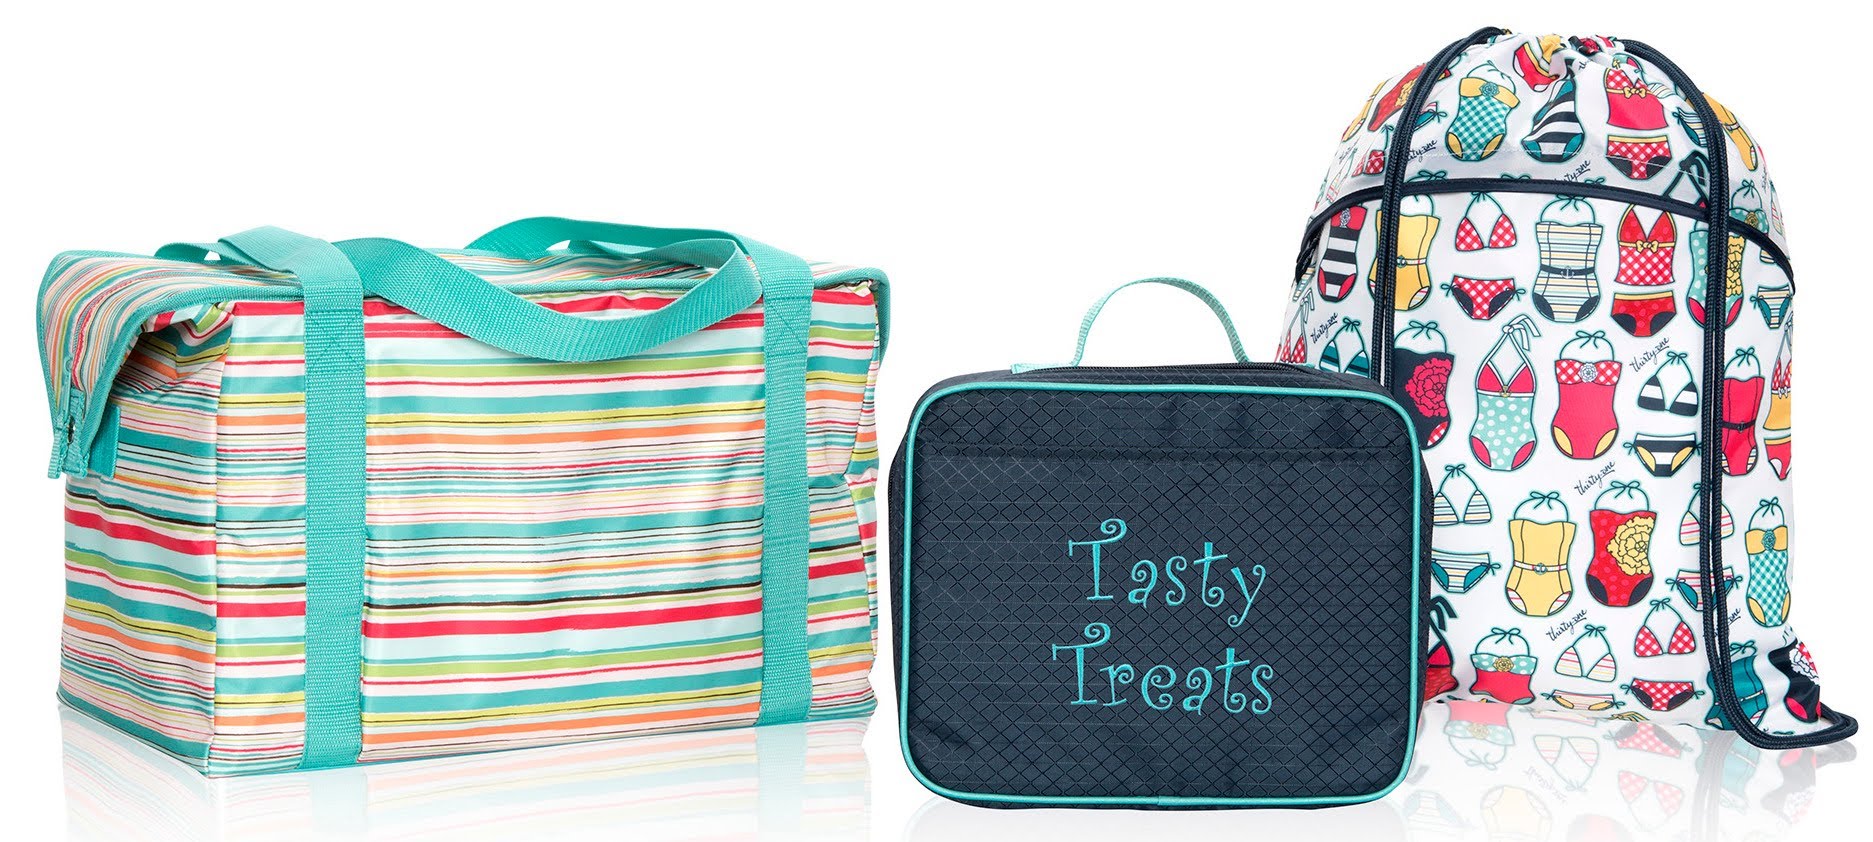 Summer 2014 Add On Kit From Thirty One Gifts   Youtube